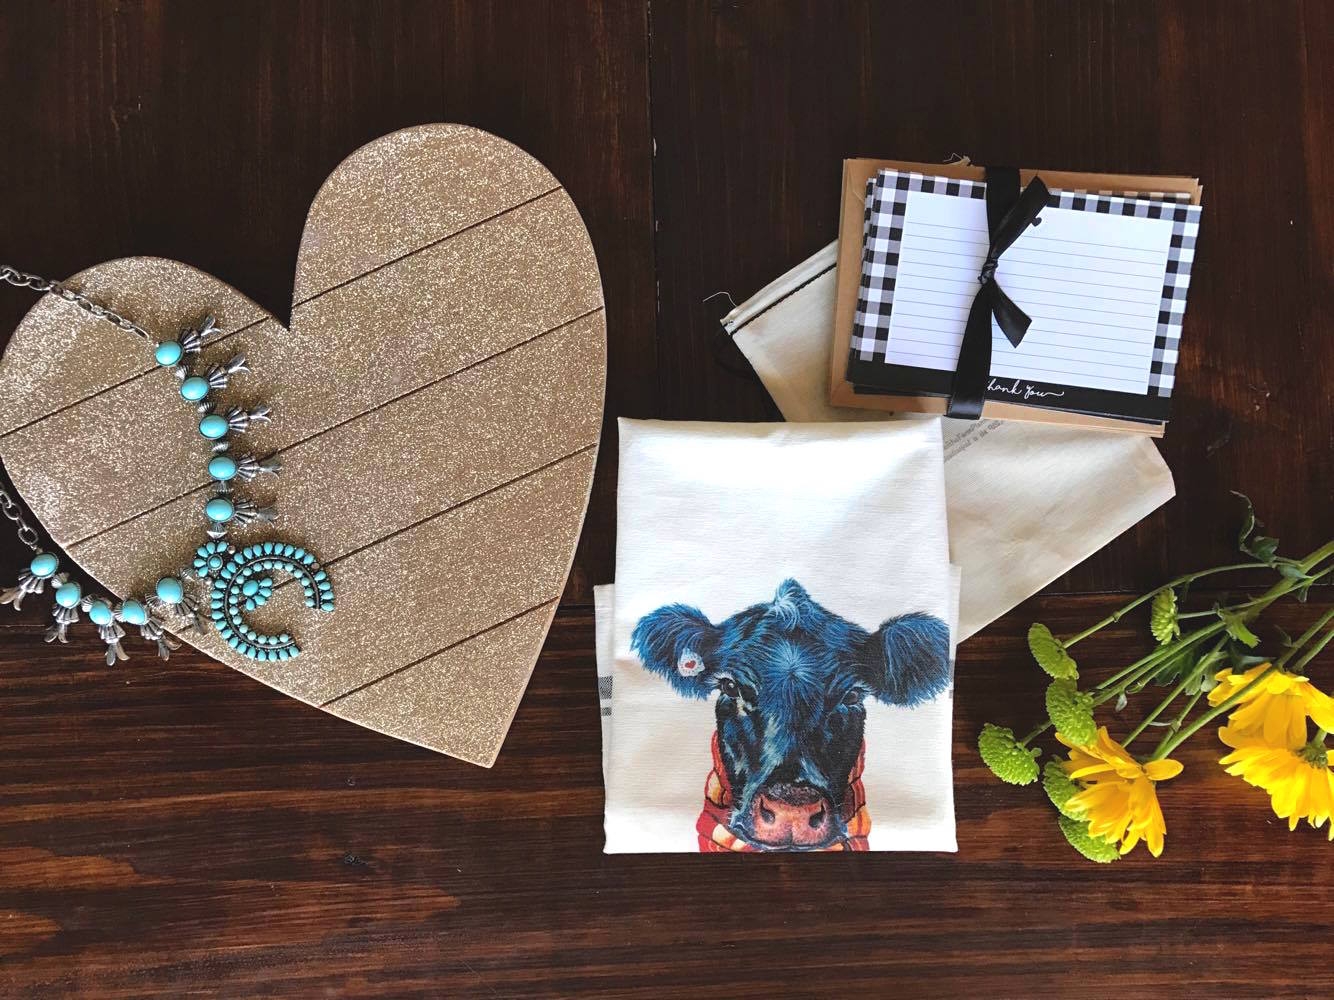 Best DIY Valentine's Day Gift Ideas for Him or Her - Rhythms of Play